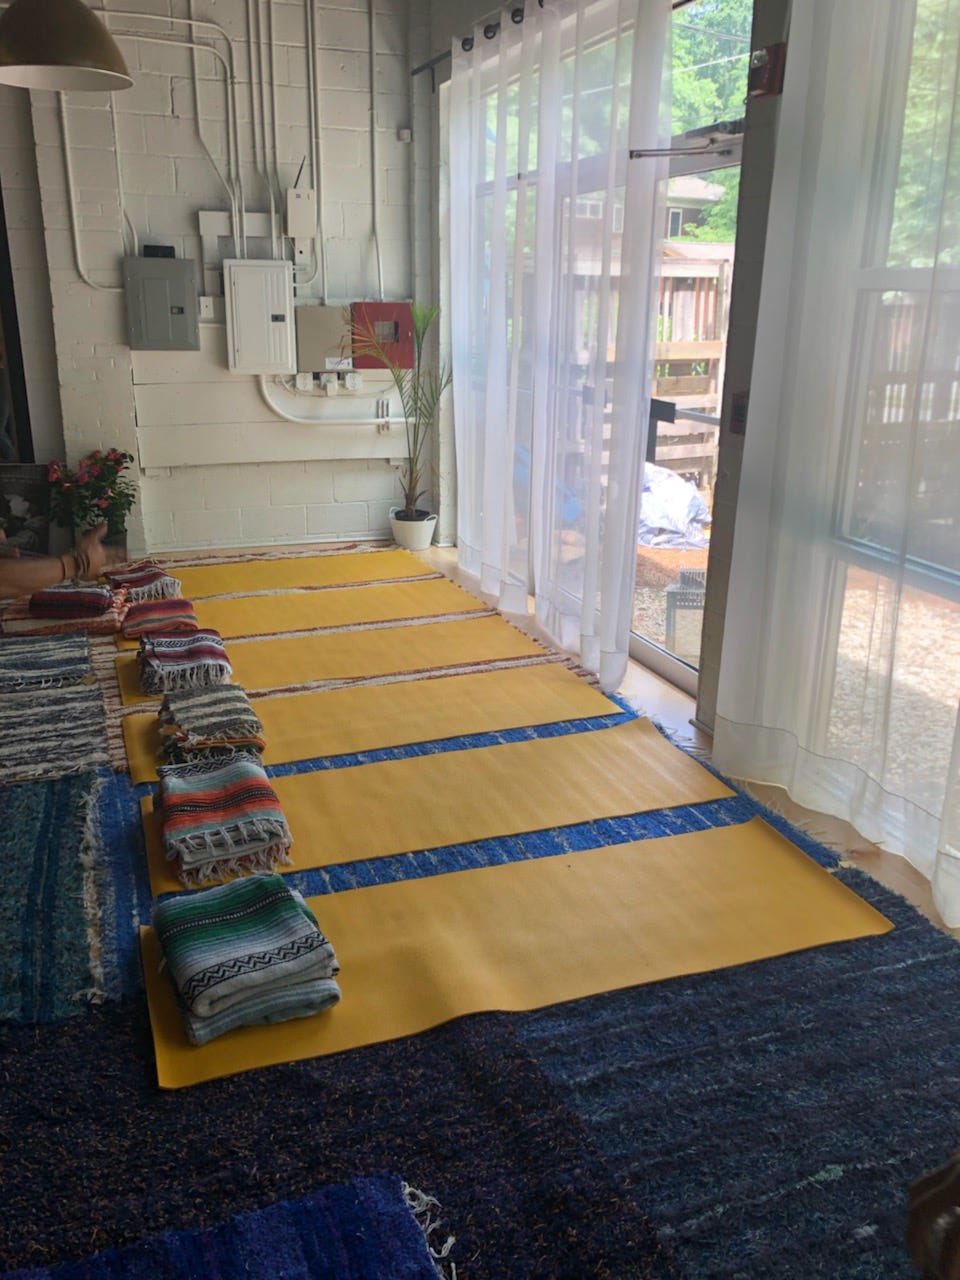 Yellow mats and blankets line the floors of The Yellow Mat Yoga Studio. An open, partially curtained window lets in a soft breeze.